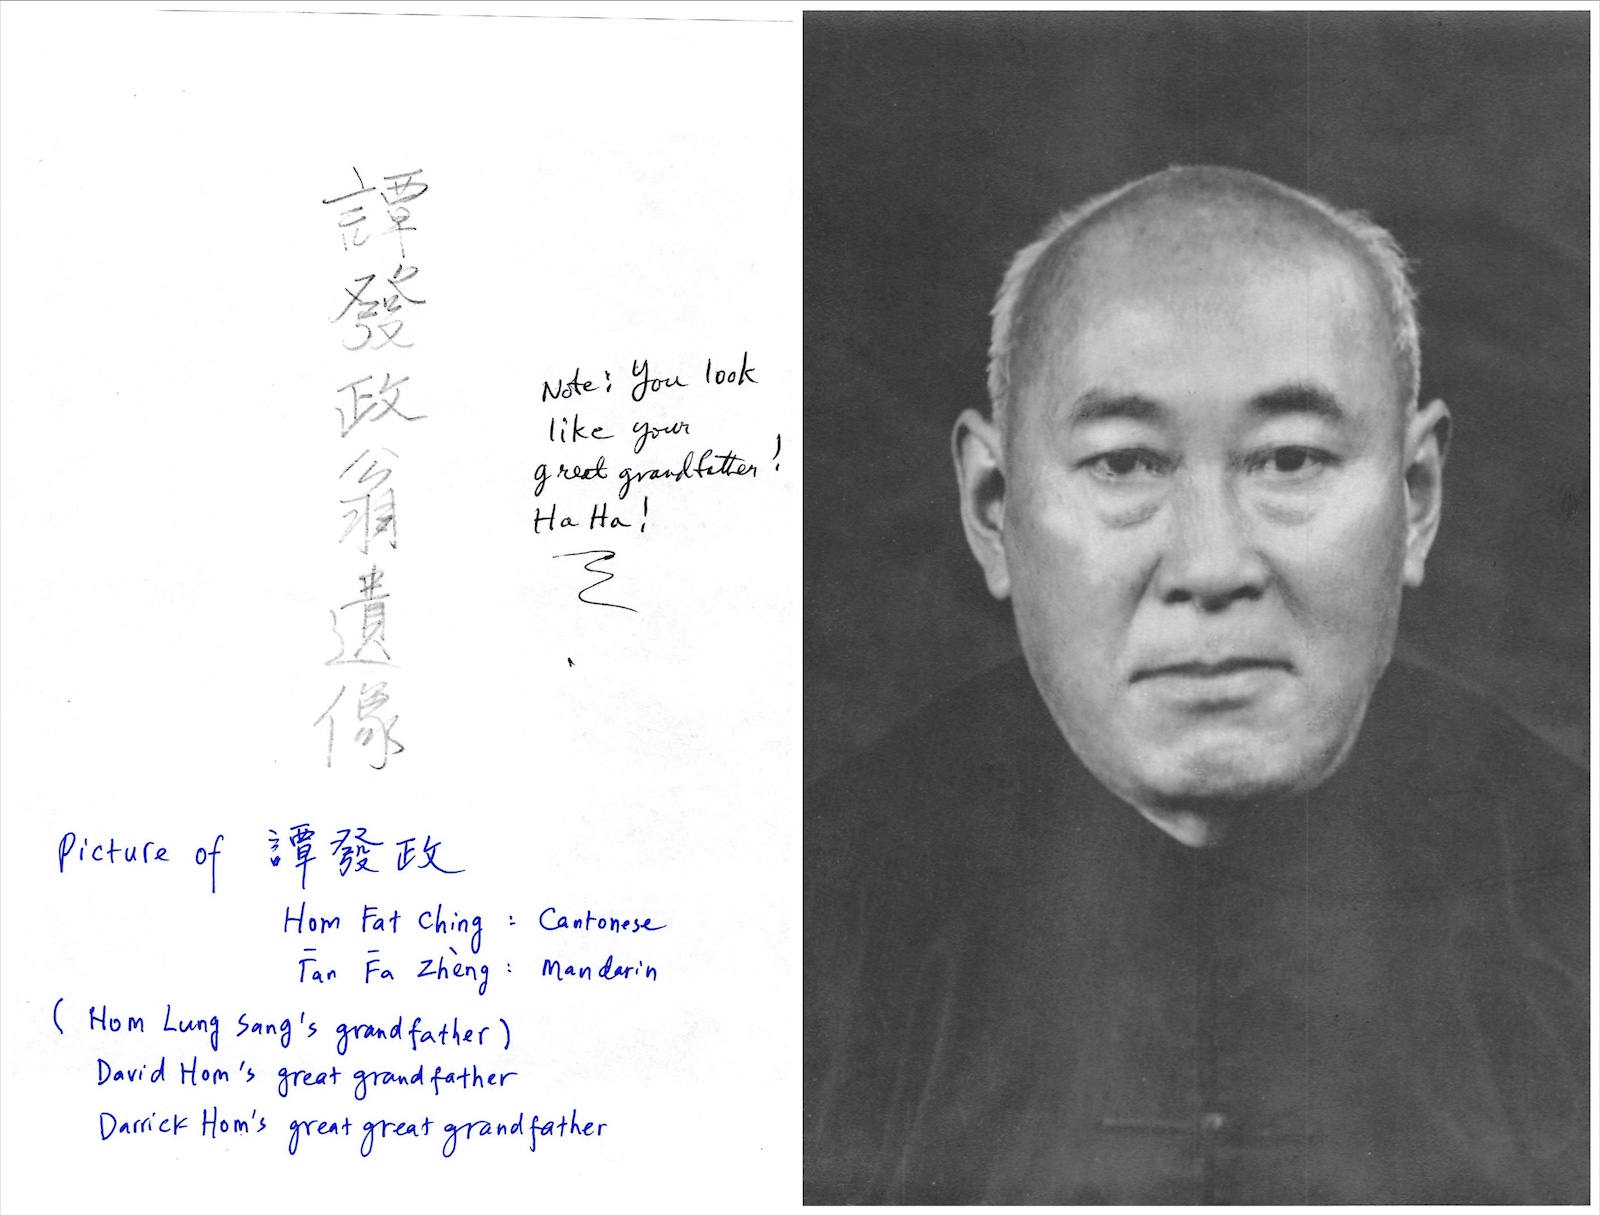 Translation notes for an old photo of David’s great-grandfather